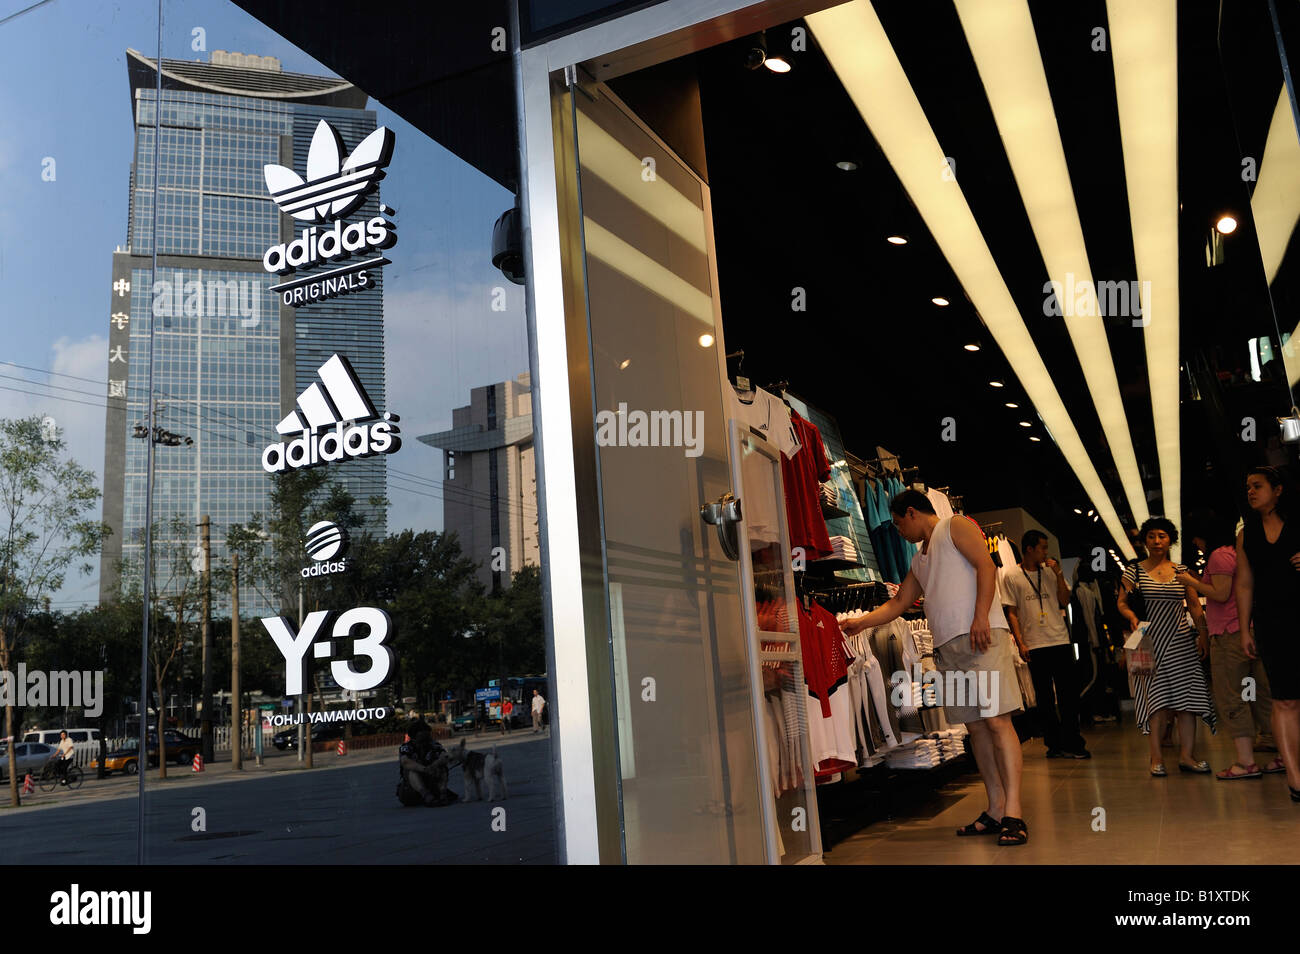 Adidas Outlet Insurgentes Top Sellers, GET 50% OFF, dh-o.com